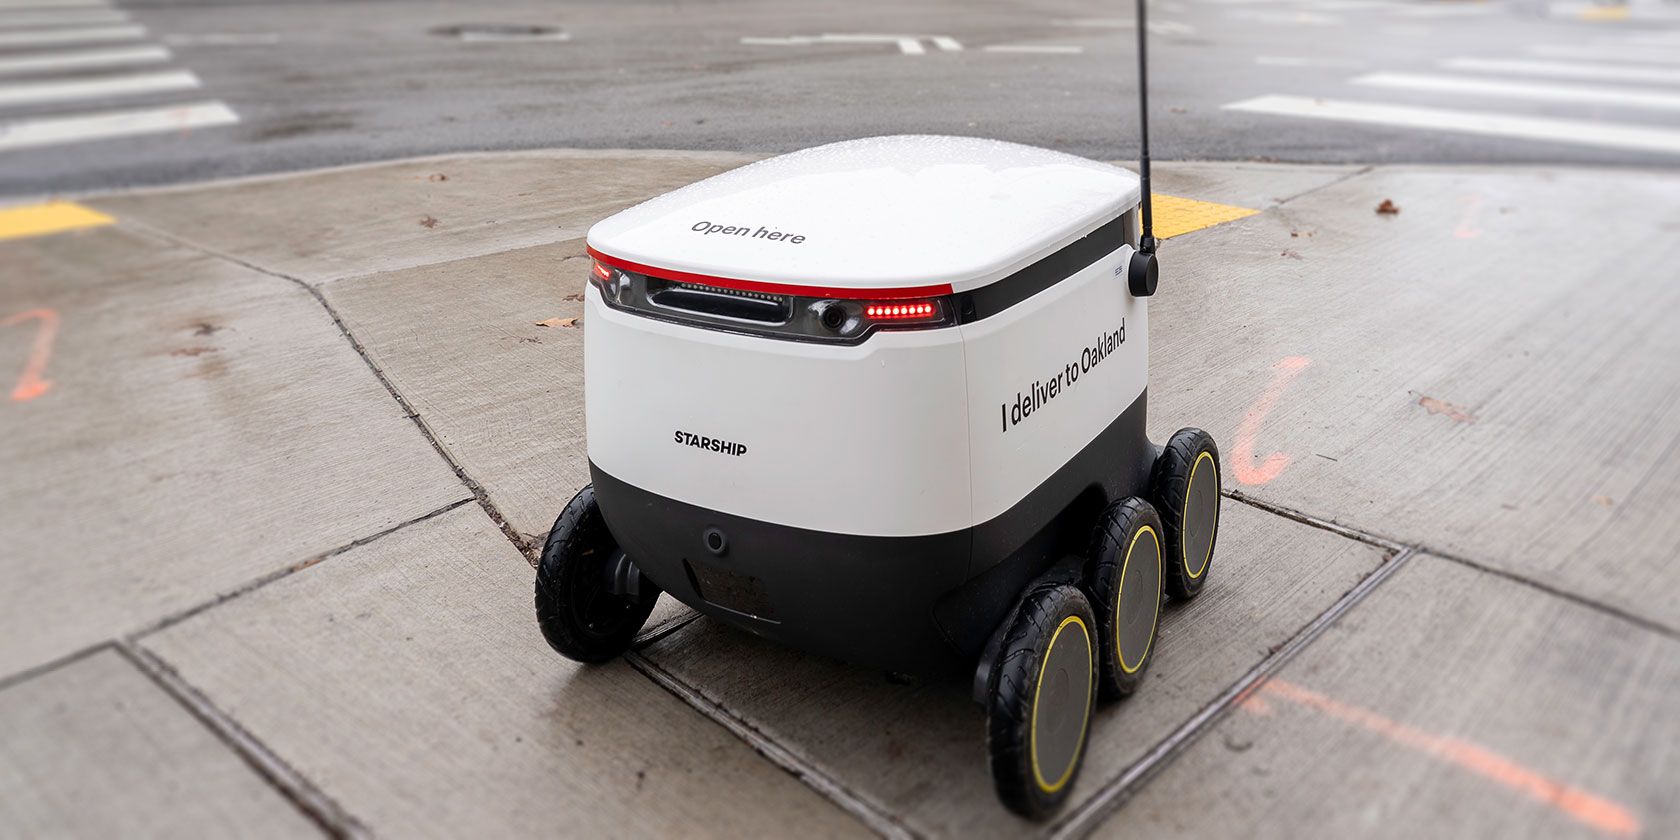 How Do Delivery Robots Work? How They Safely Deliver Your Packages